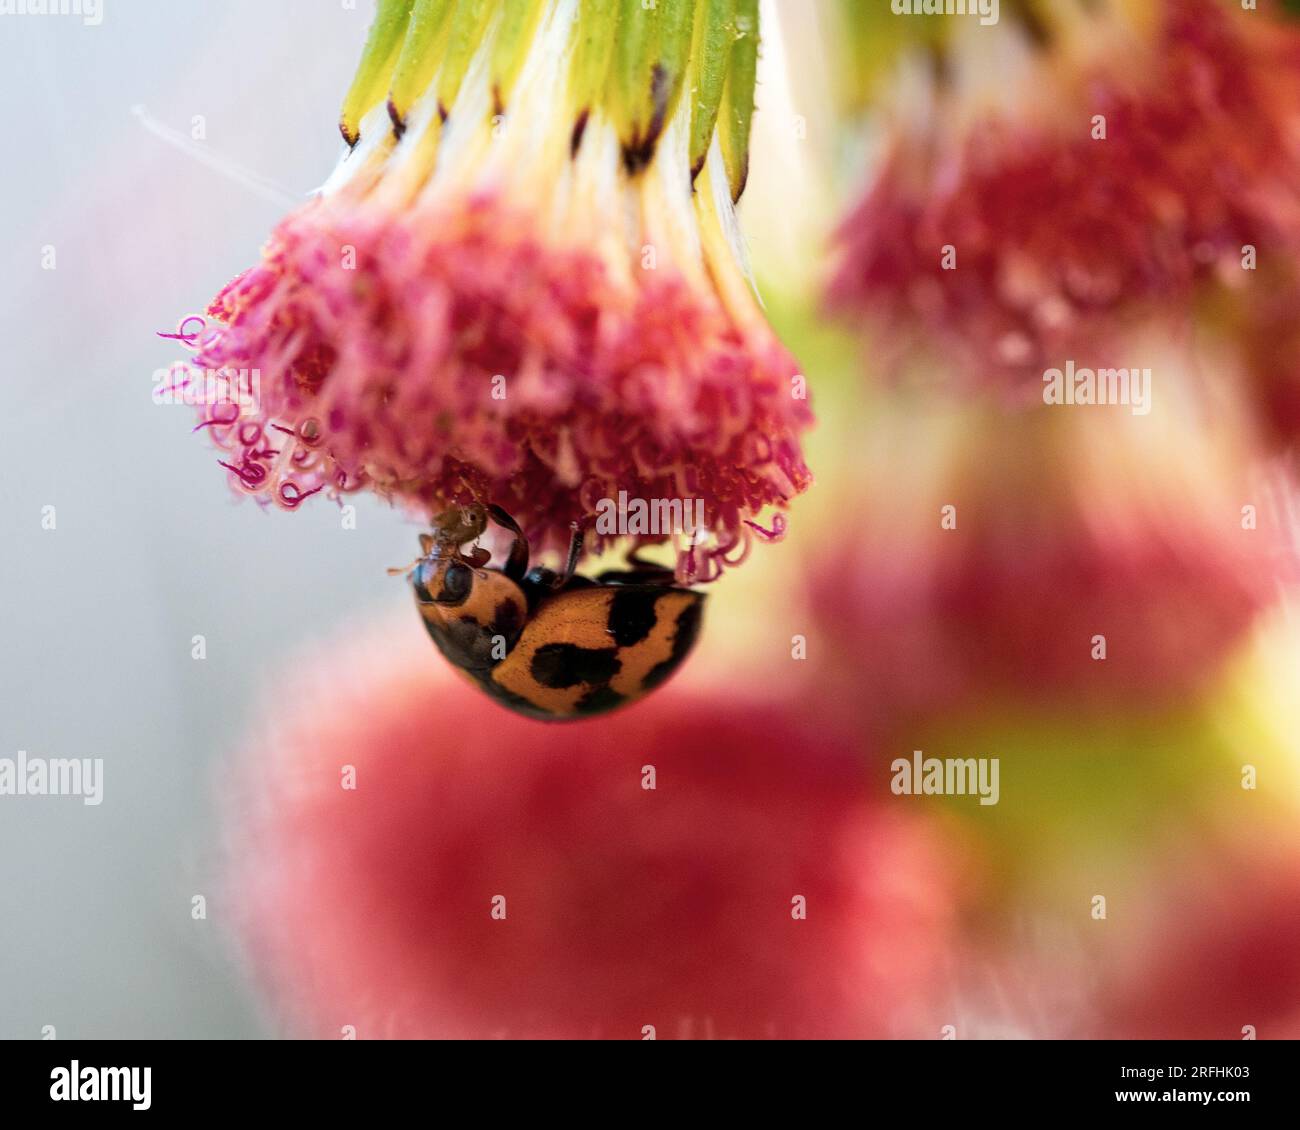 An orange with black spots ladybug underneath a  red Thickhead Flower , macro, blurred background Stock Photo